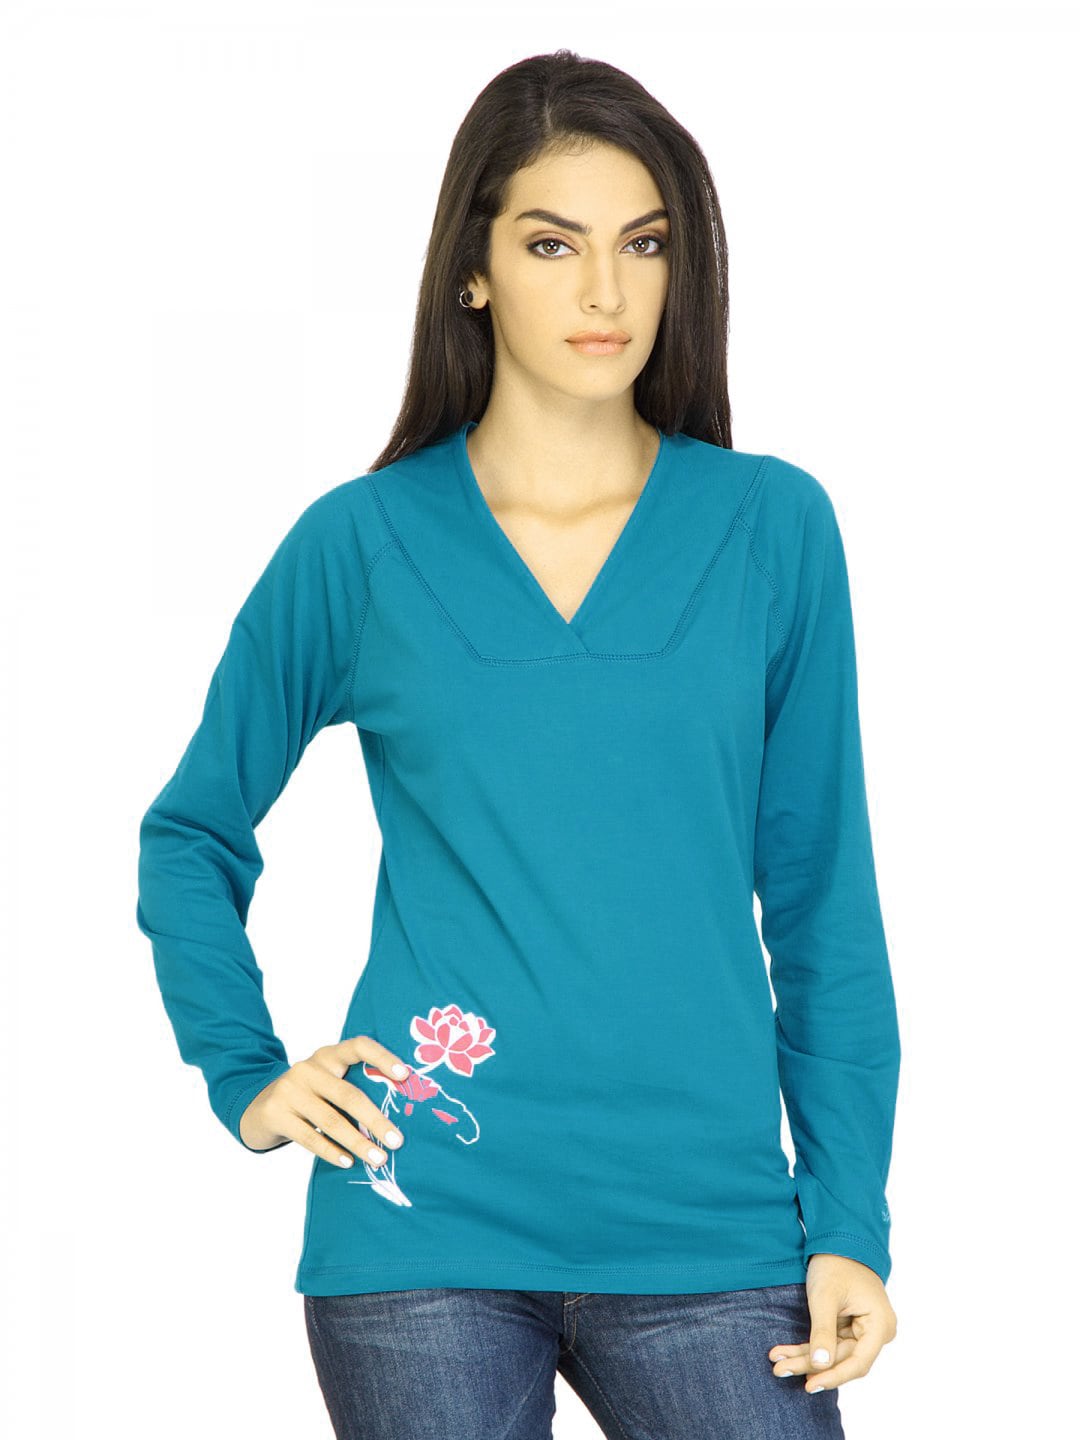 Urban Yoga Women Solid Turquoise Blue Tops